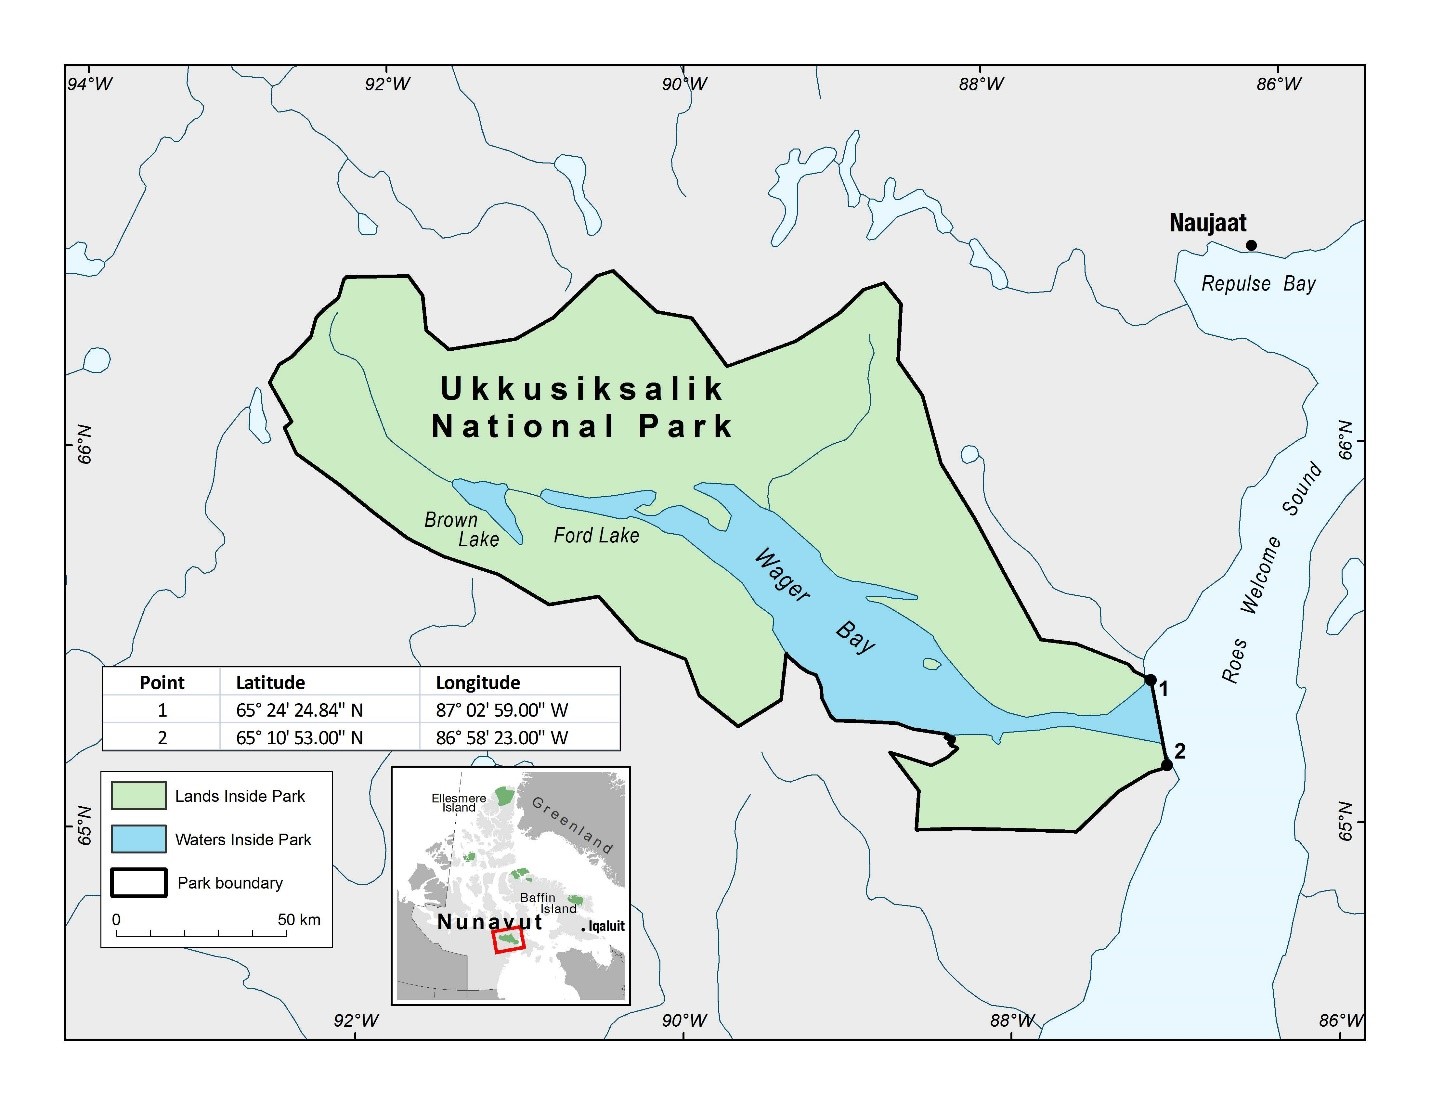 Map of Ukkusiksalik National Park of Canada with coordinate points to indicate its boundary when accessed by water.